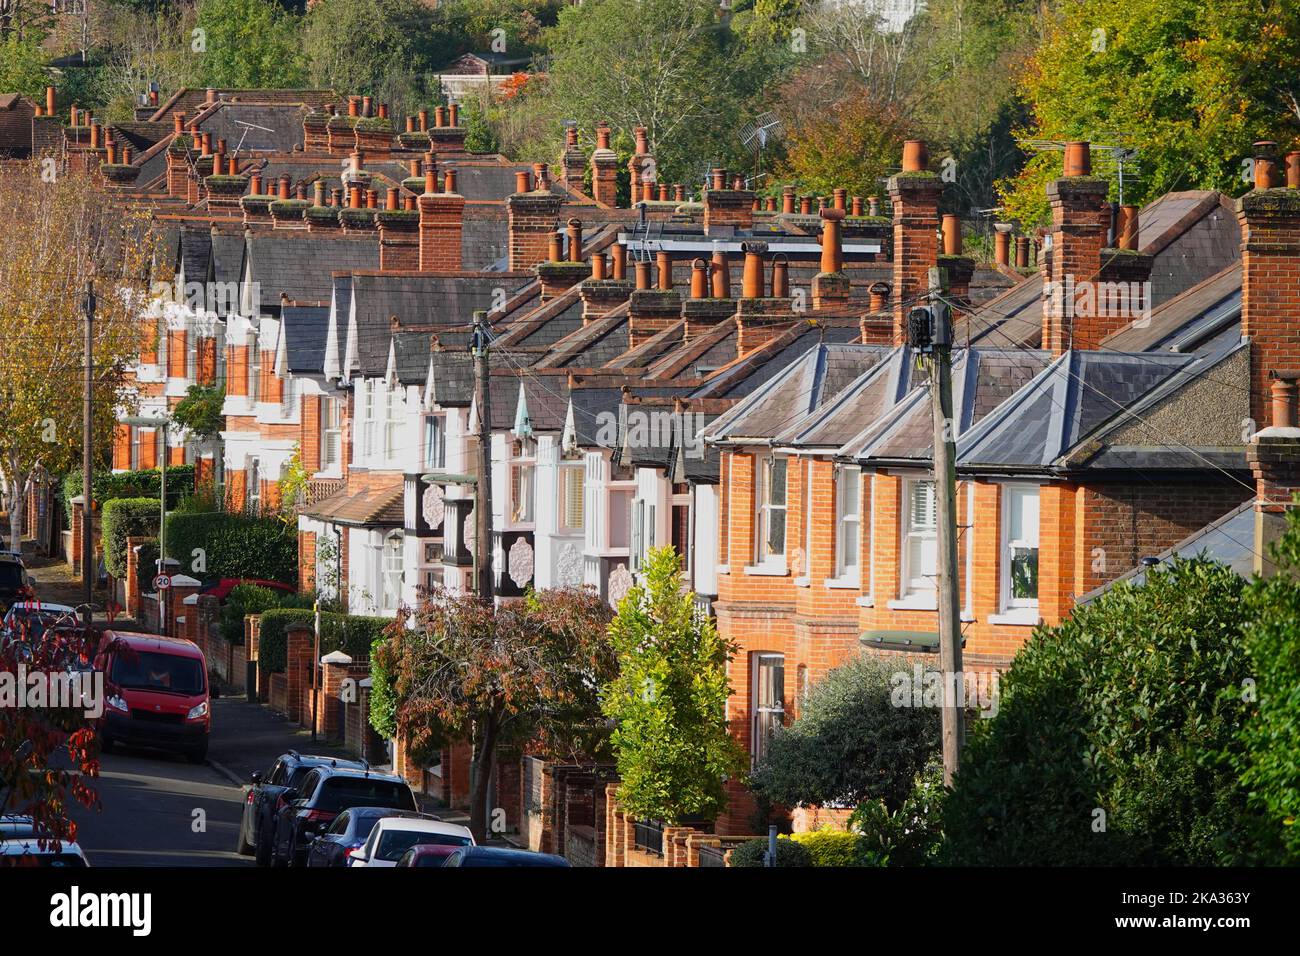 Street of brick victorian terrace houses with numerous chimneys in leafy English suburb on sunny autumn day. Stock Photo